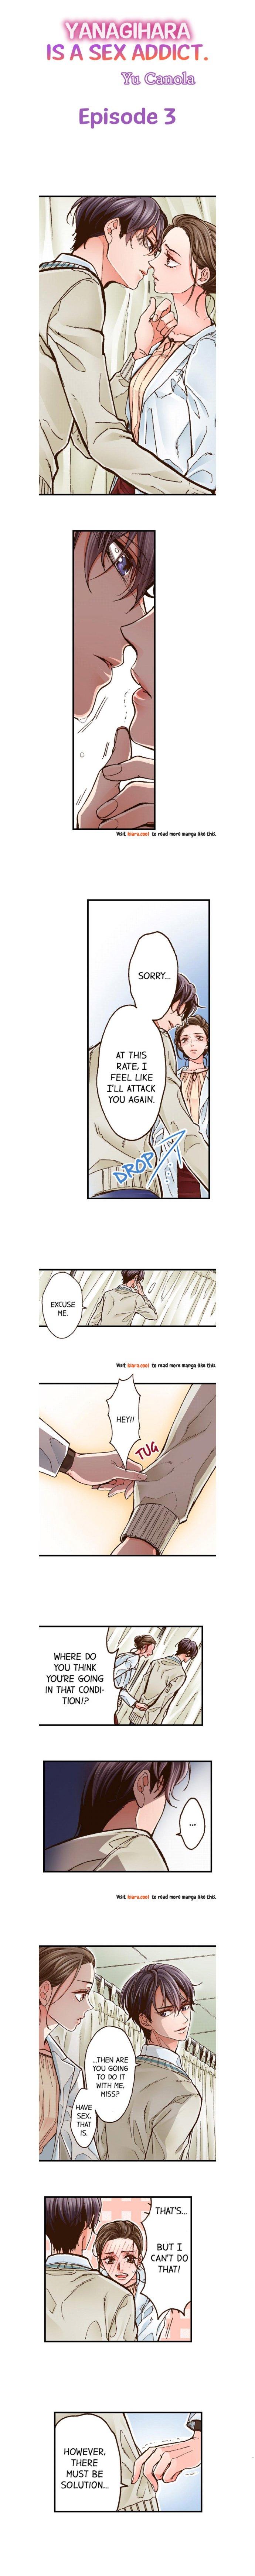 Yanagihara Is a Sex Addict - Chapter 3 Page 1